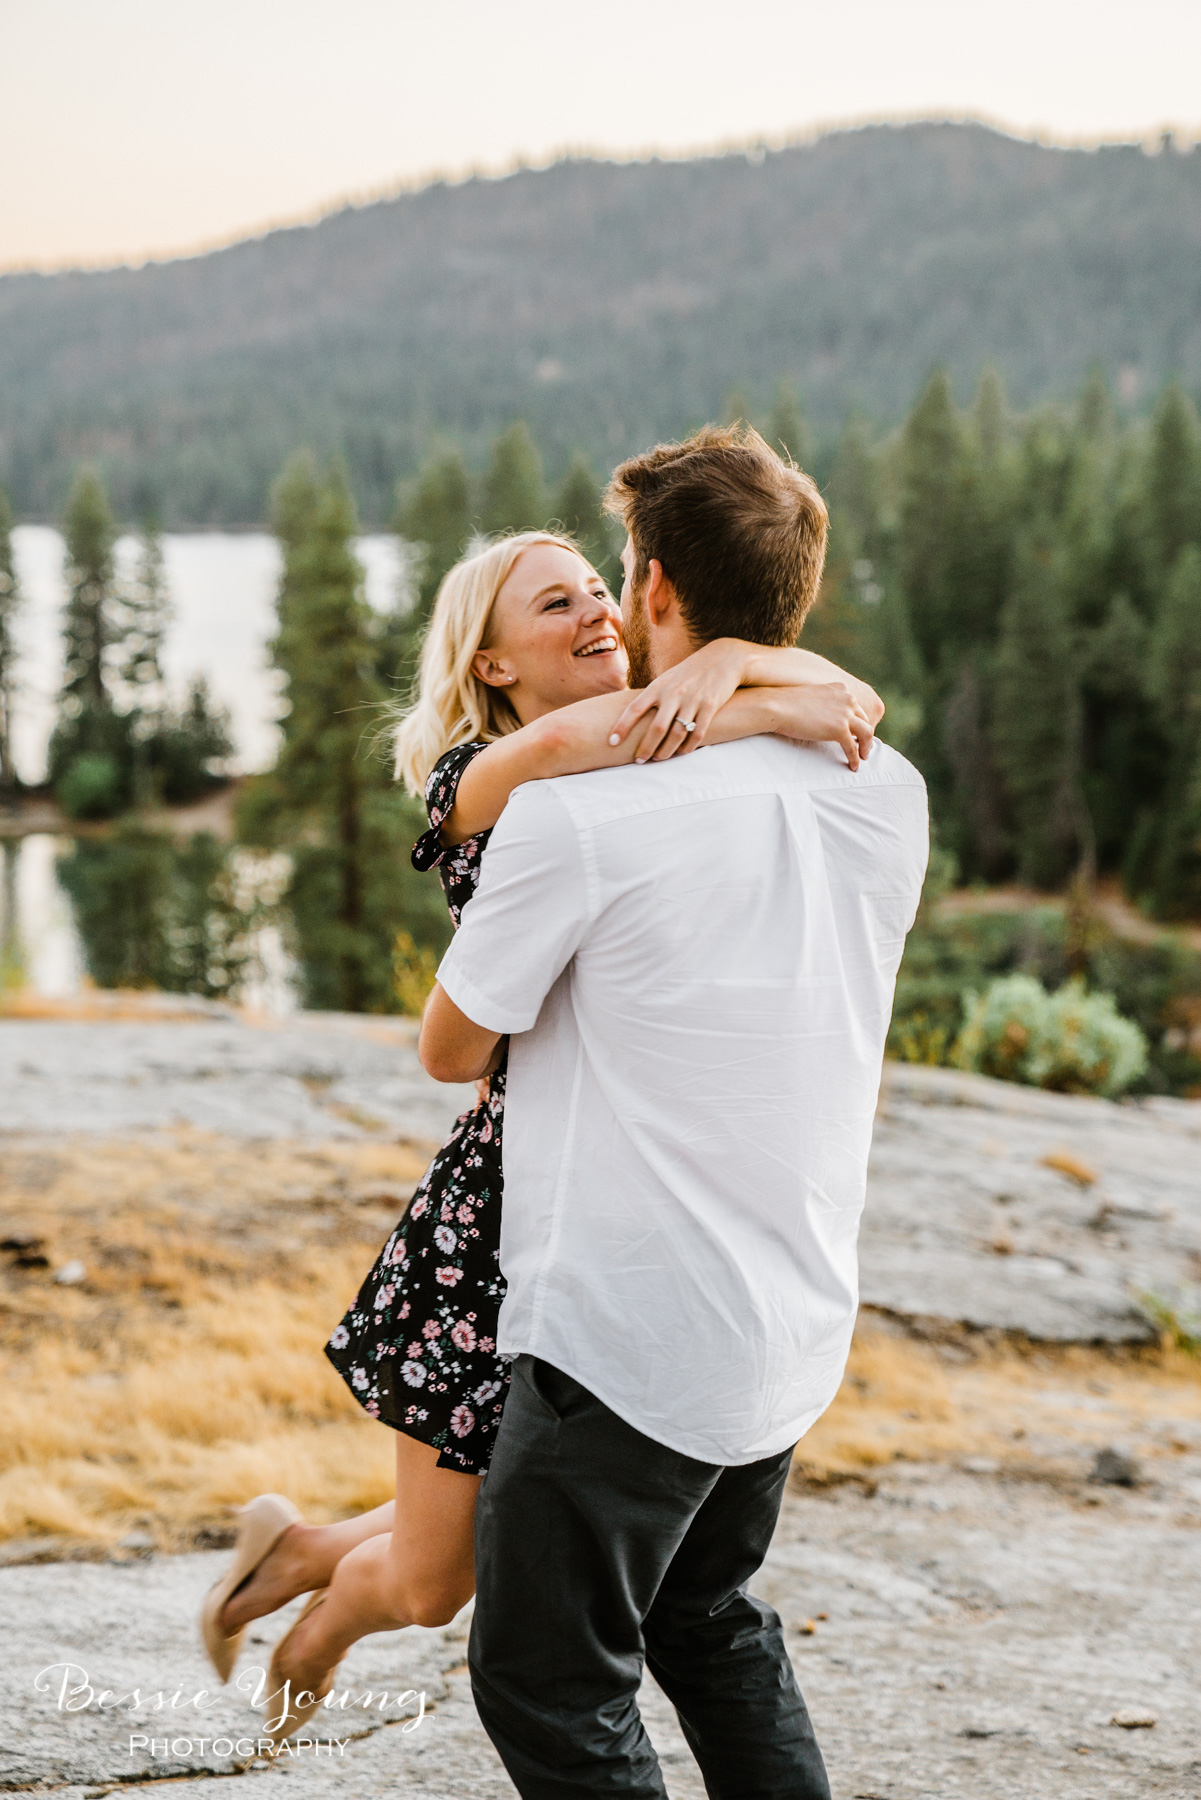 Shaver Lake Engagement Portraits - Meghan and Clay -  by Bessie Young Photography 2018 A7R2-272.jpg